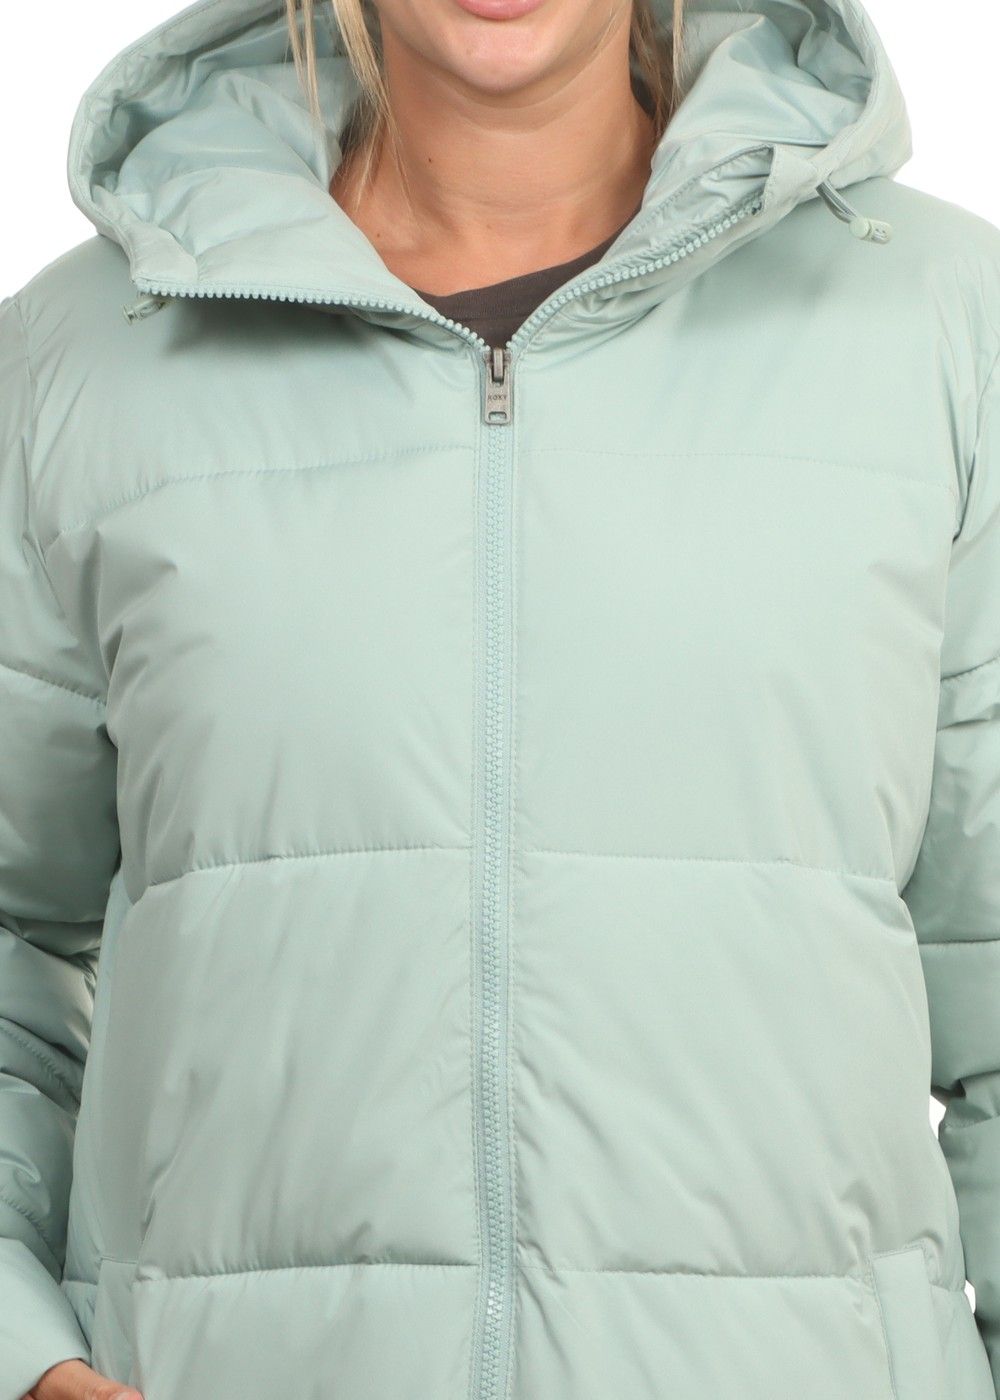 Top-Modell Roxy Test Of Time Surf Blue Jacket